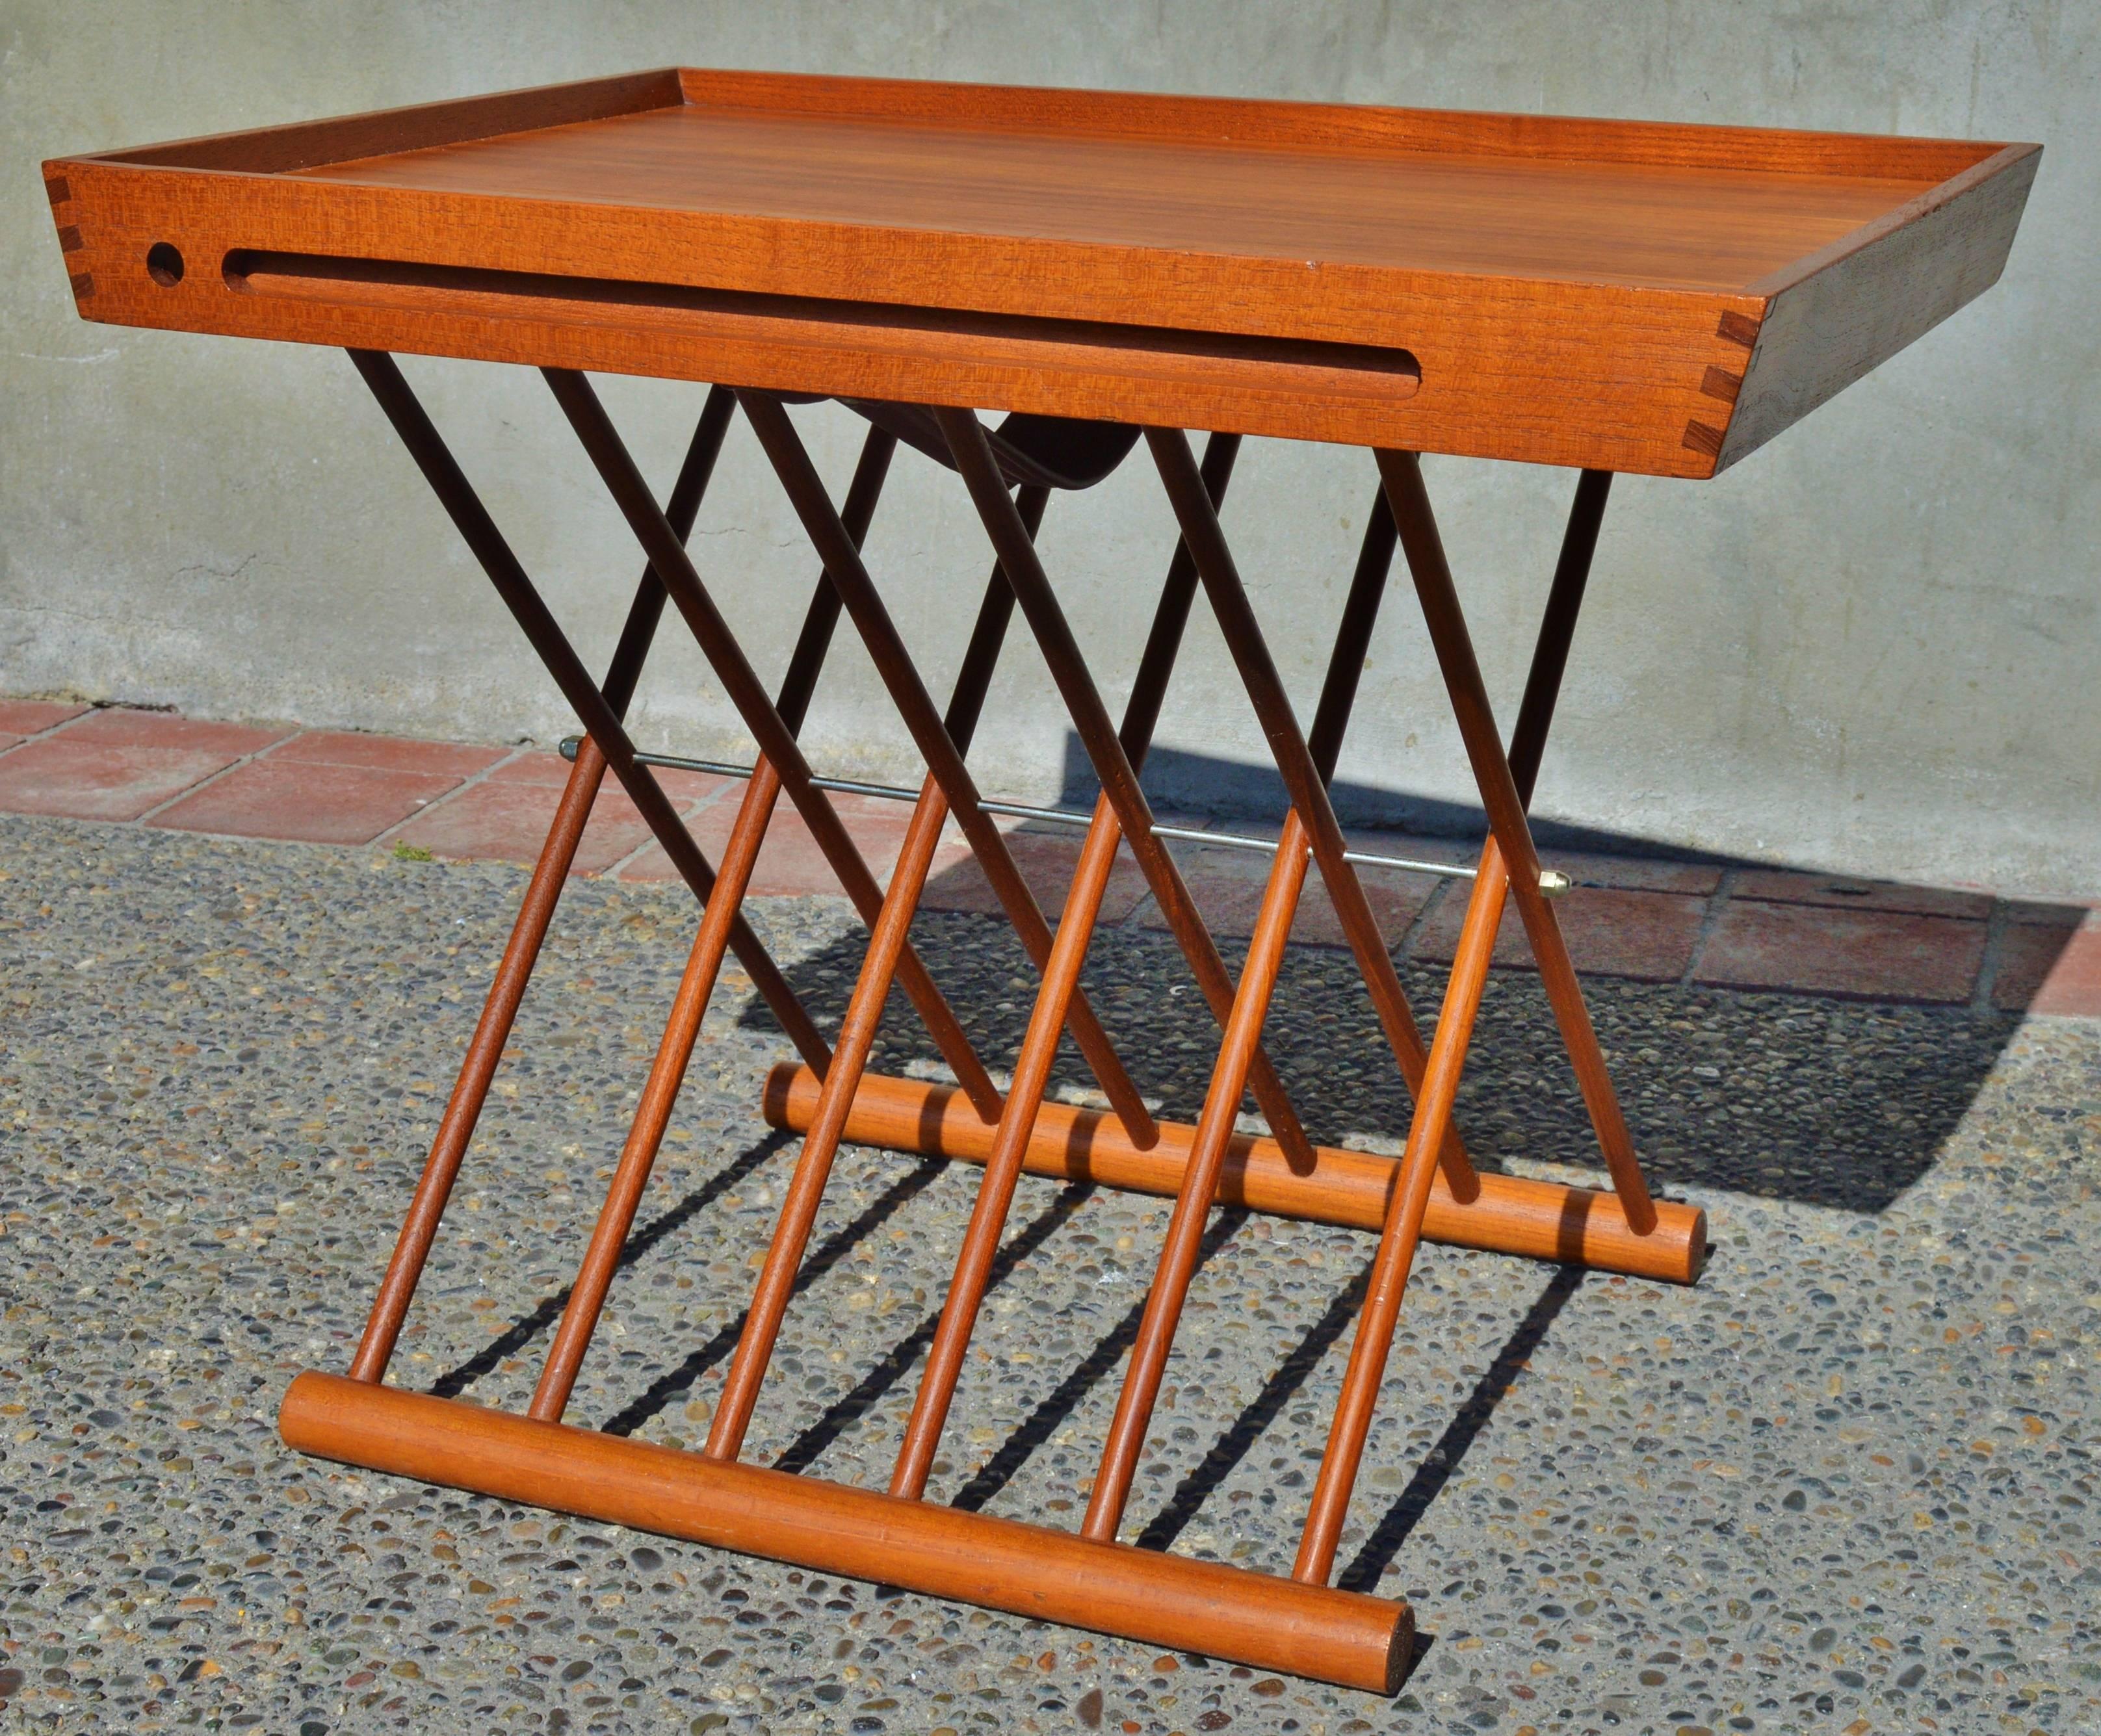 This unique Danish modern teak tray top folding table is a quality, early Danish piece bearing the branded Danish Control symbol. In excellent condition and just oiled, the table consists of a tray top upper which can be removed to serve guests,